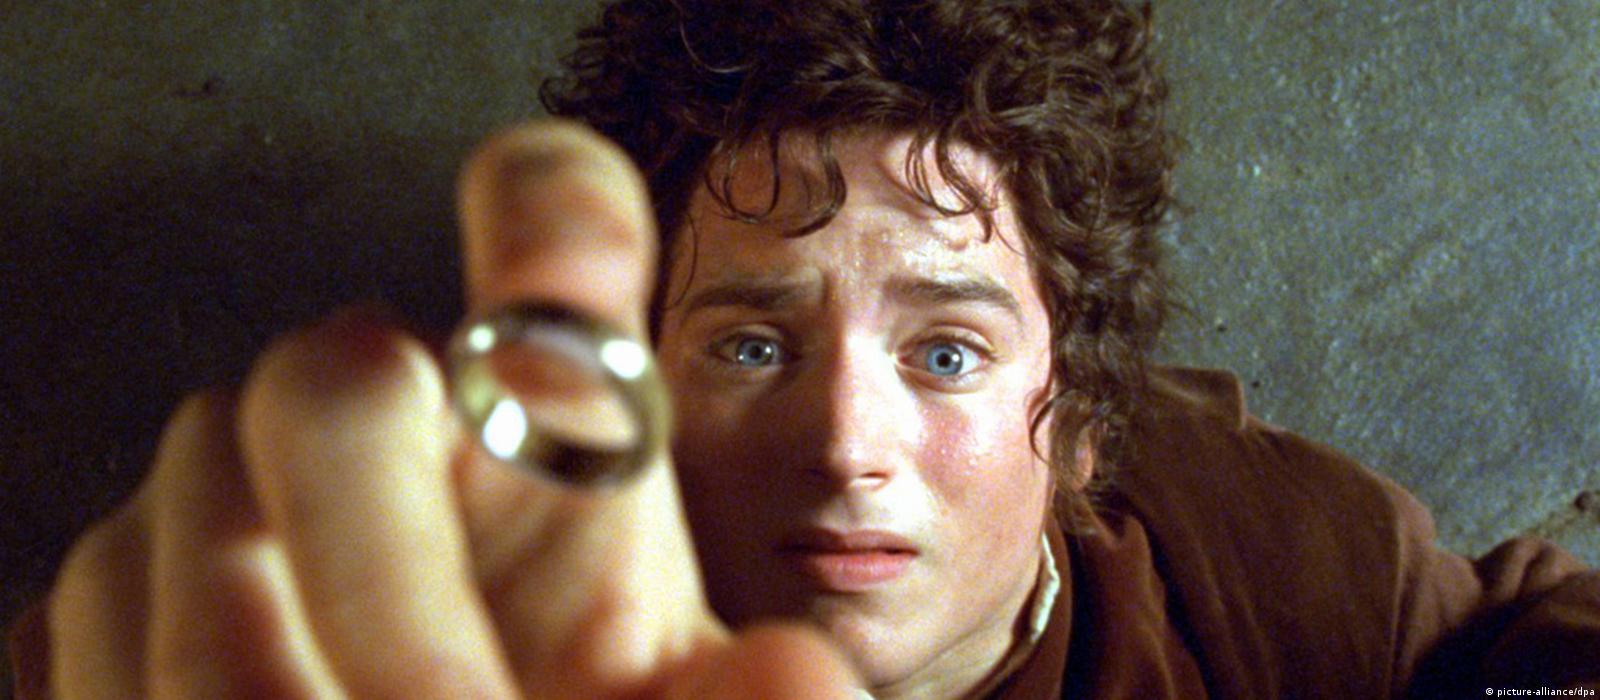 Op-ed: Why The Lord of the Rings movies matter 20 years later